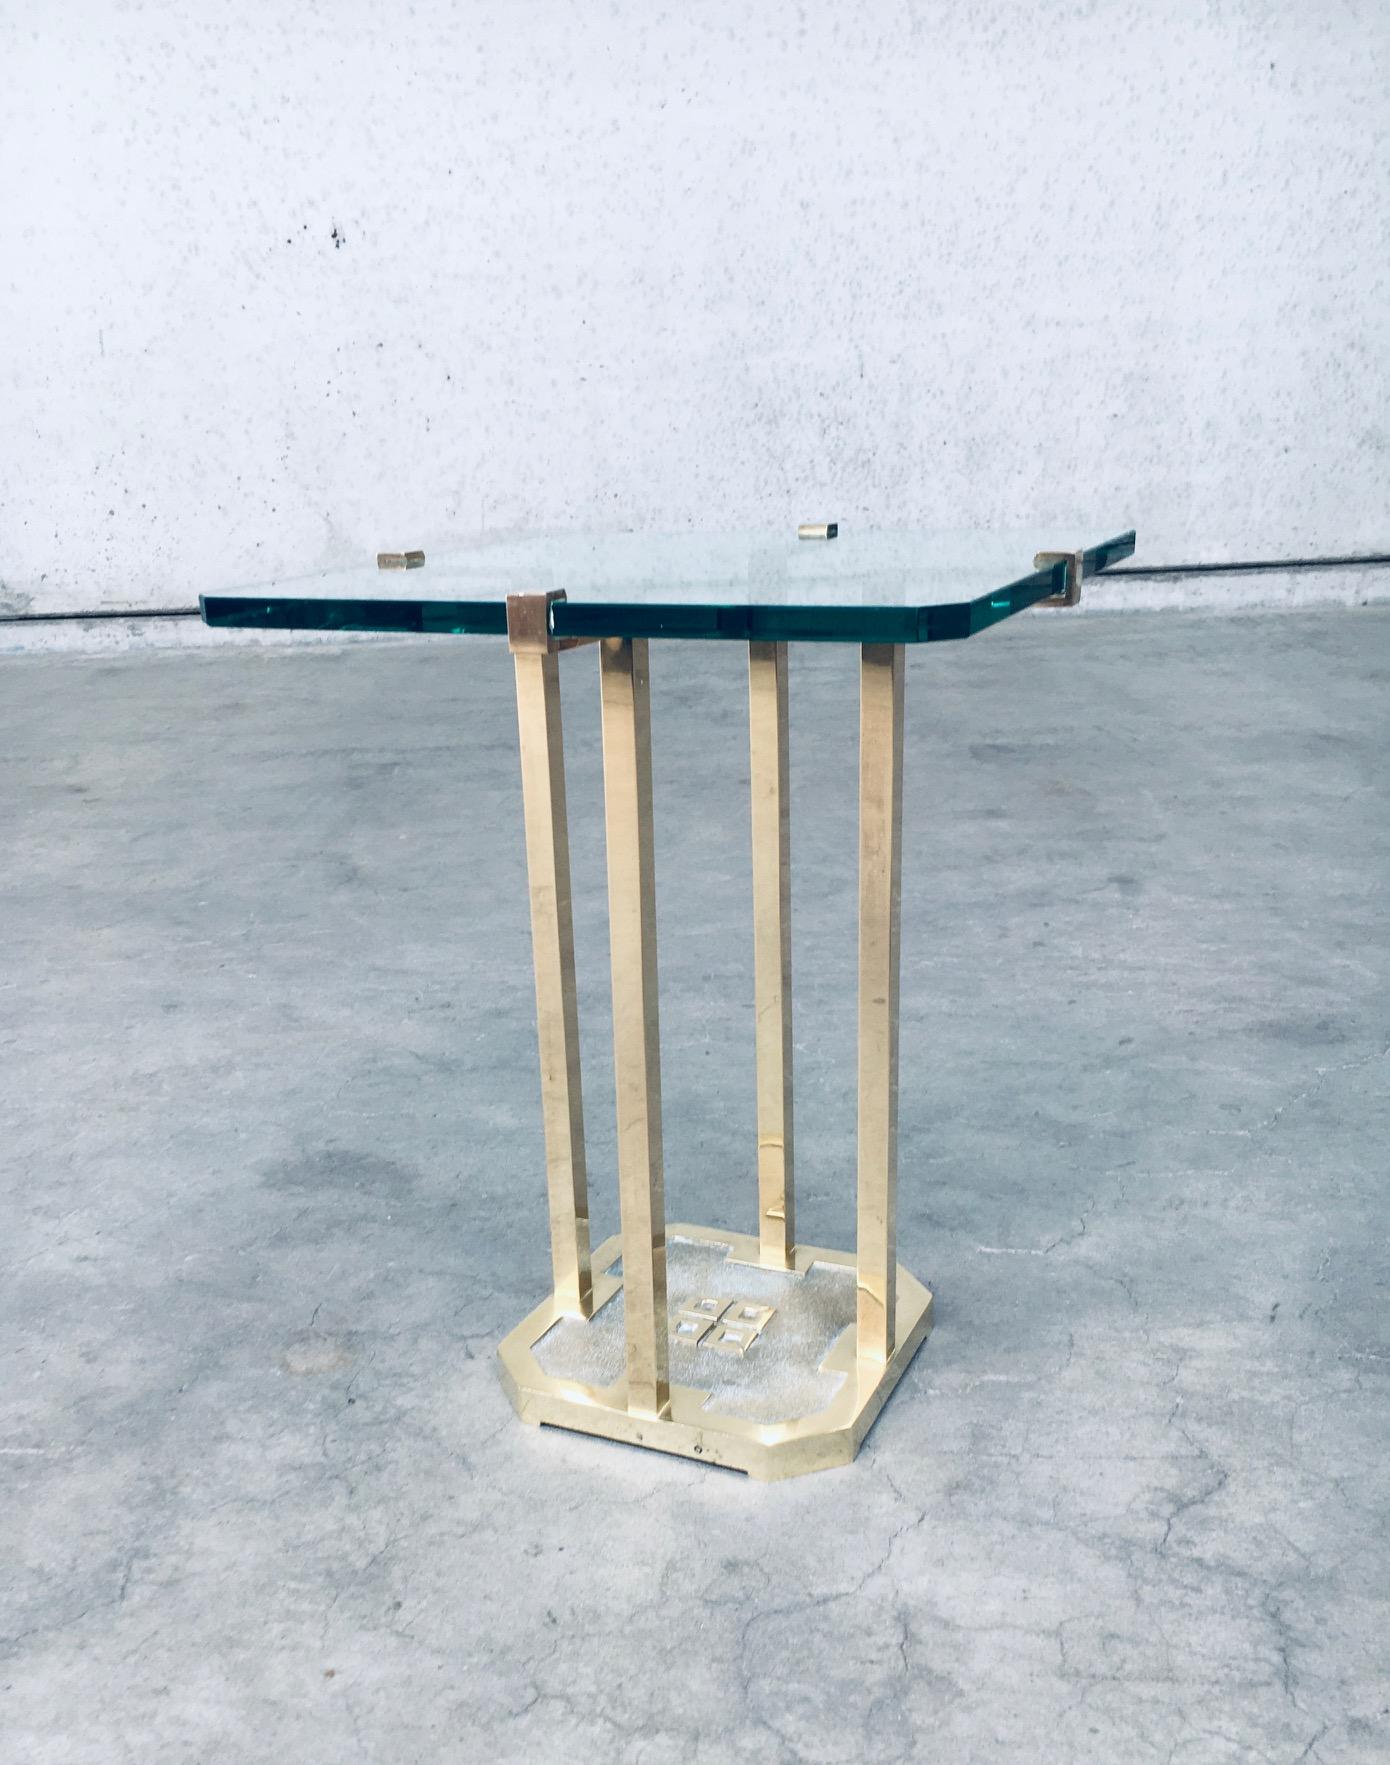 Vintage Postmodern Design Modernist side table model T18 by Peter Ghyczy. Made in the Netherlands, 1970's. Patinated worked brass & heavy thick cut glass. In very good condition. Measures: 41cm x 41cm x53cm.

After the Hungarian revolution of